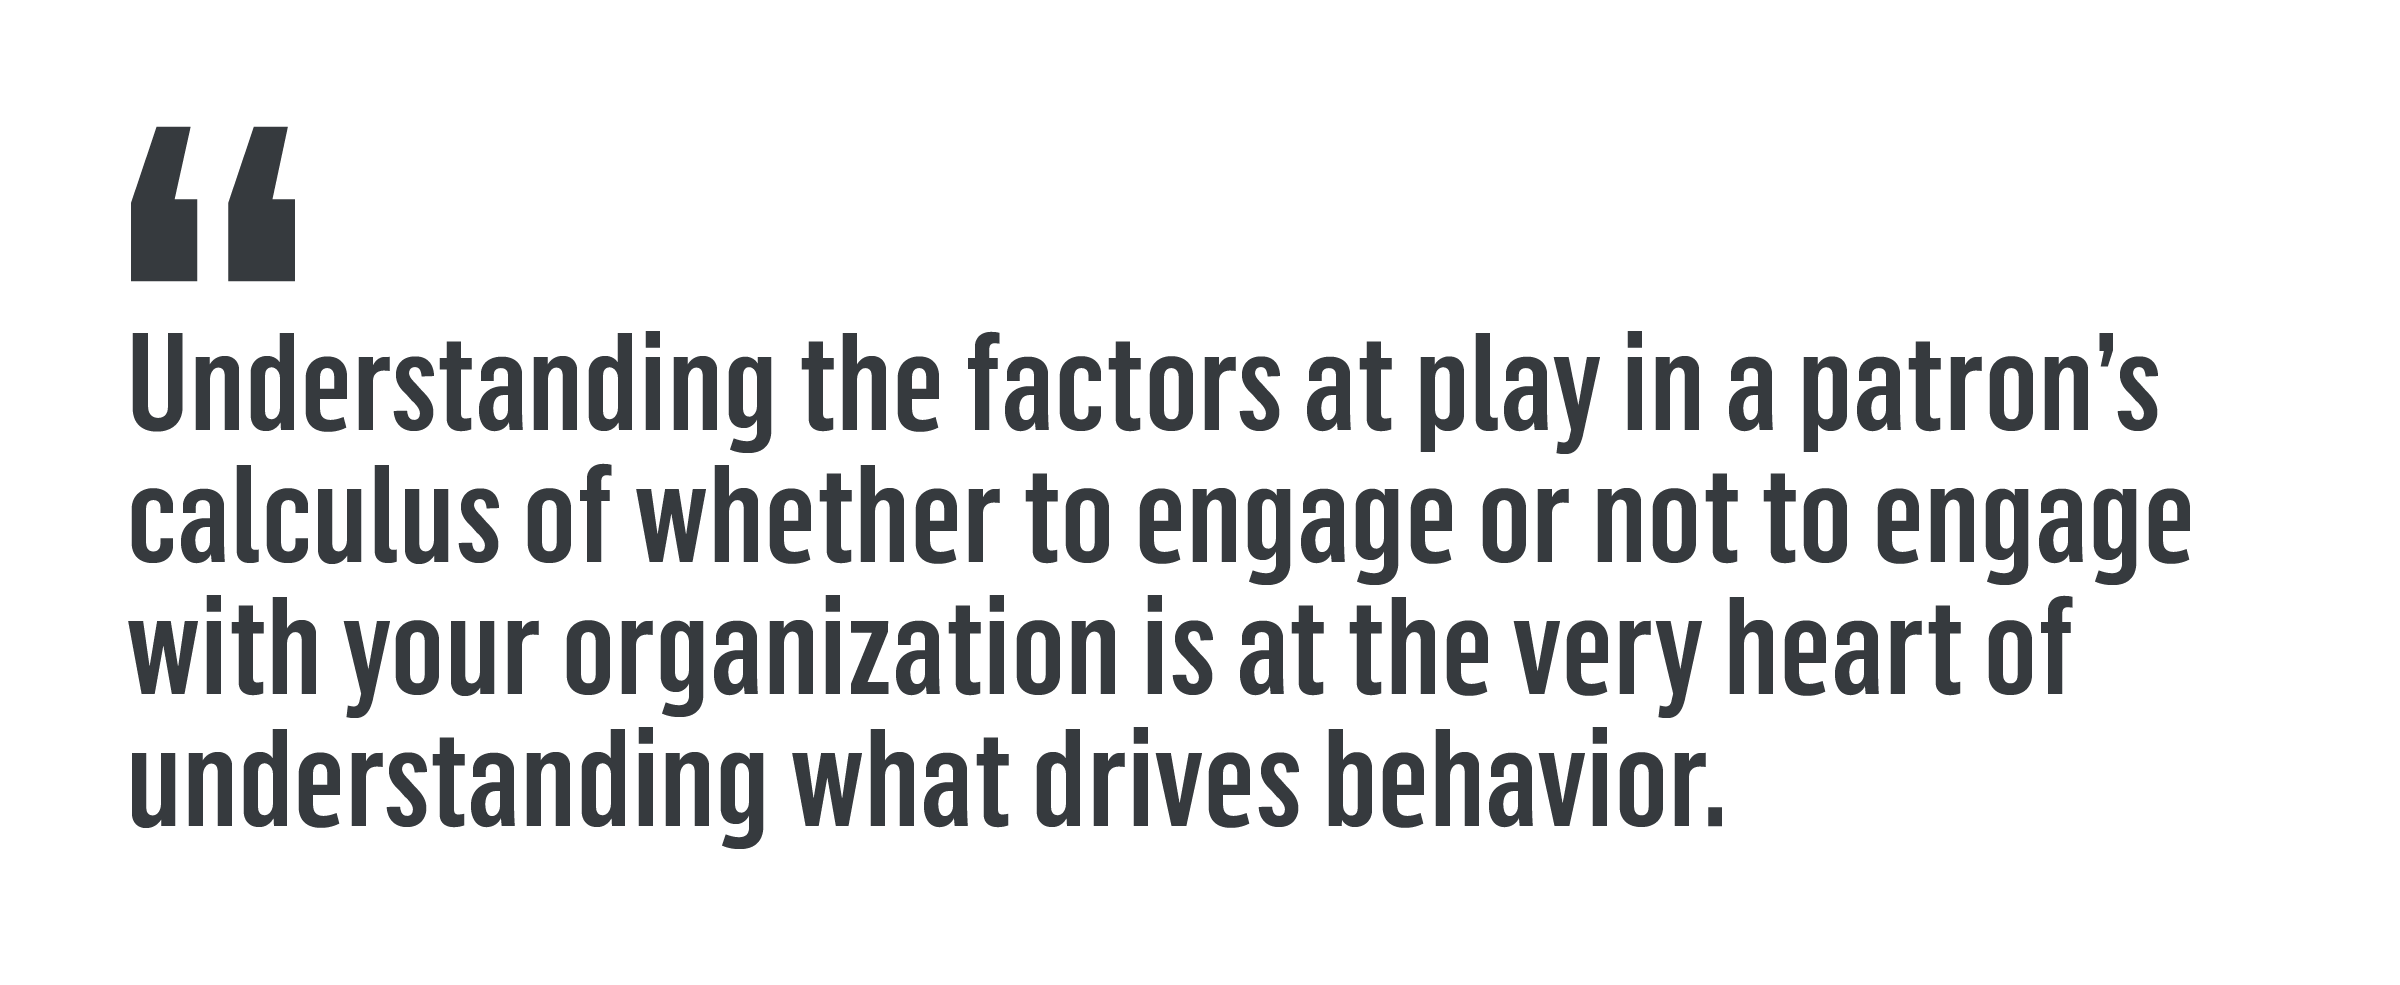 "Understanding the factors at play in a patron’s calculus of whether to engage or not to engage with your organization is at the very heart of understanding what drives behavior."